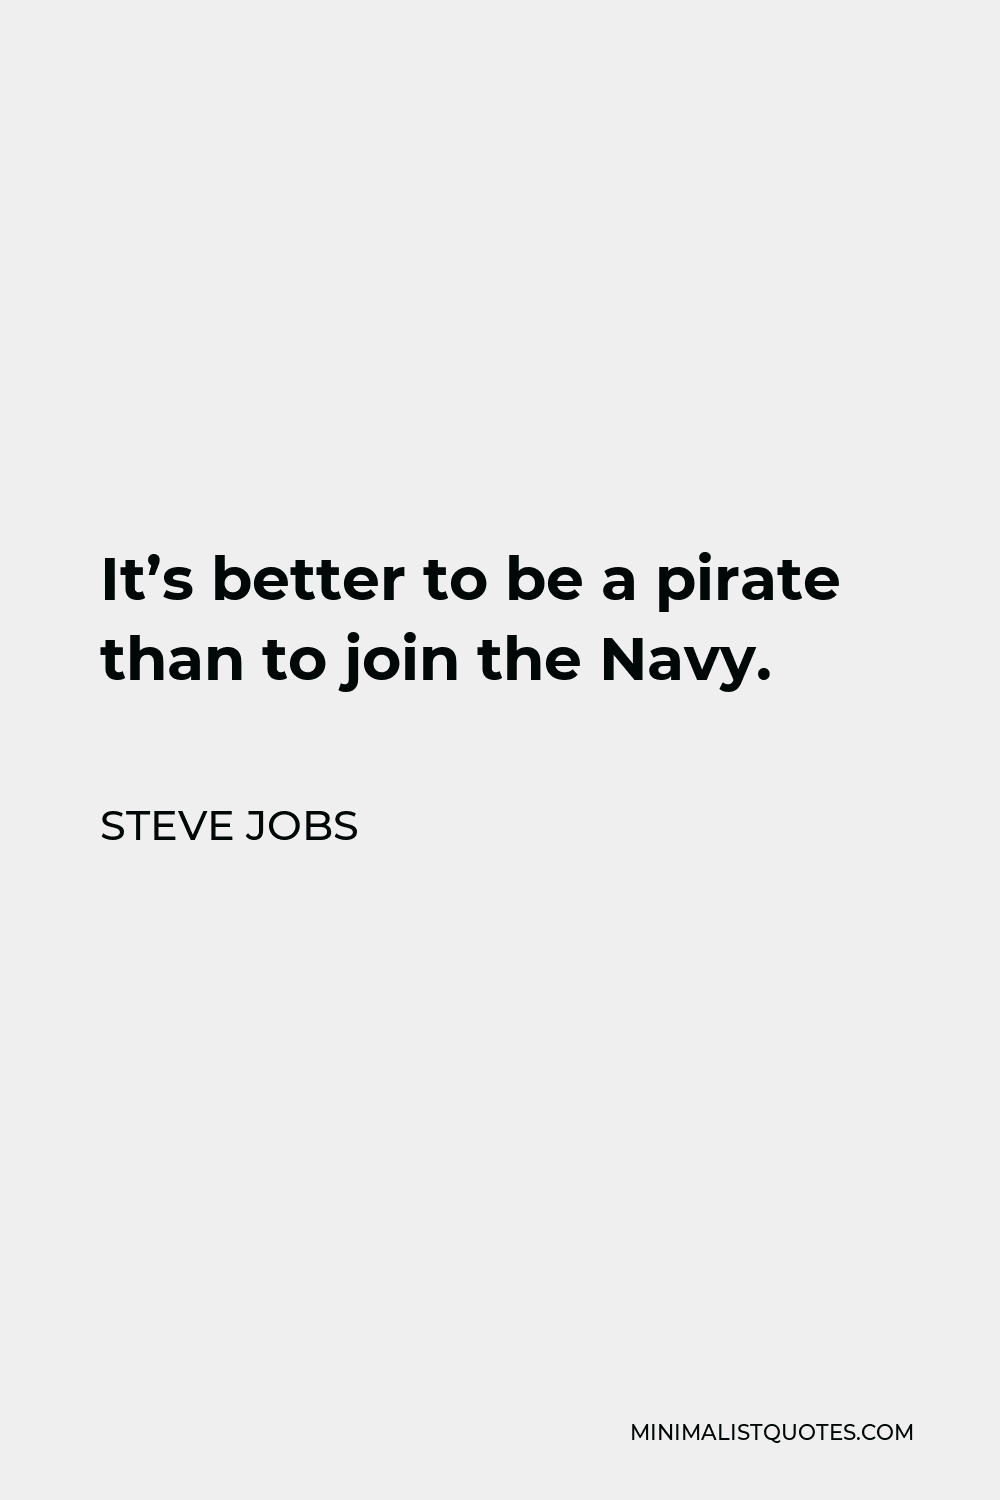 Steve Jobs Quote - It’s better to be a pirate than to join the Navy.